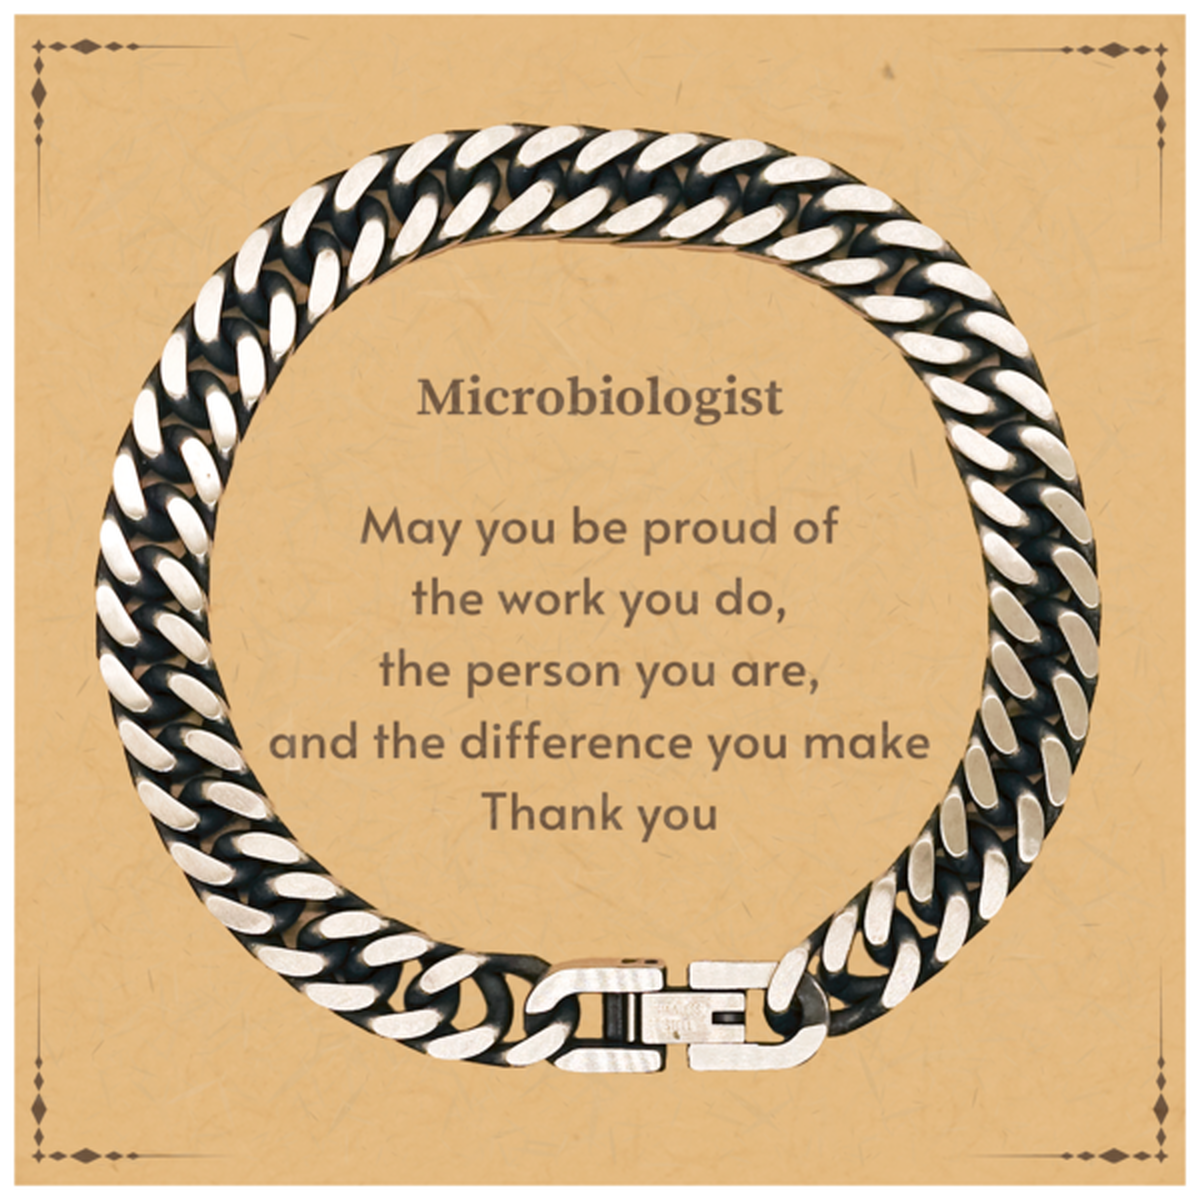 Heartwarming Cuban Link Chain Bracelet Retirement Coworkers Gifts for Microbiologist, Microbiologist May You be proud of the work you do, the person you are Gifts for Boss Men Women Friends